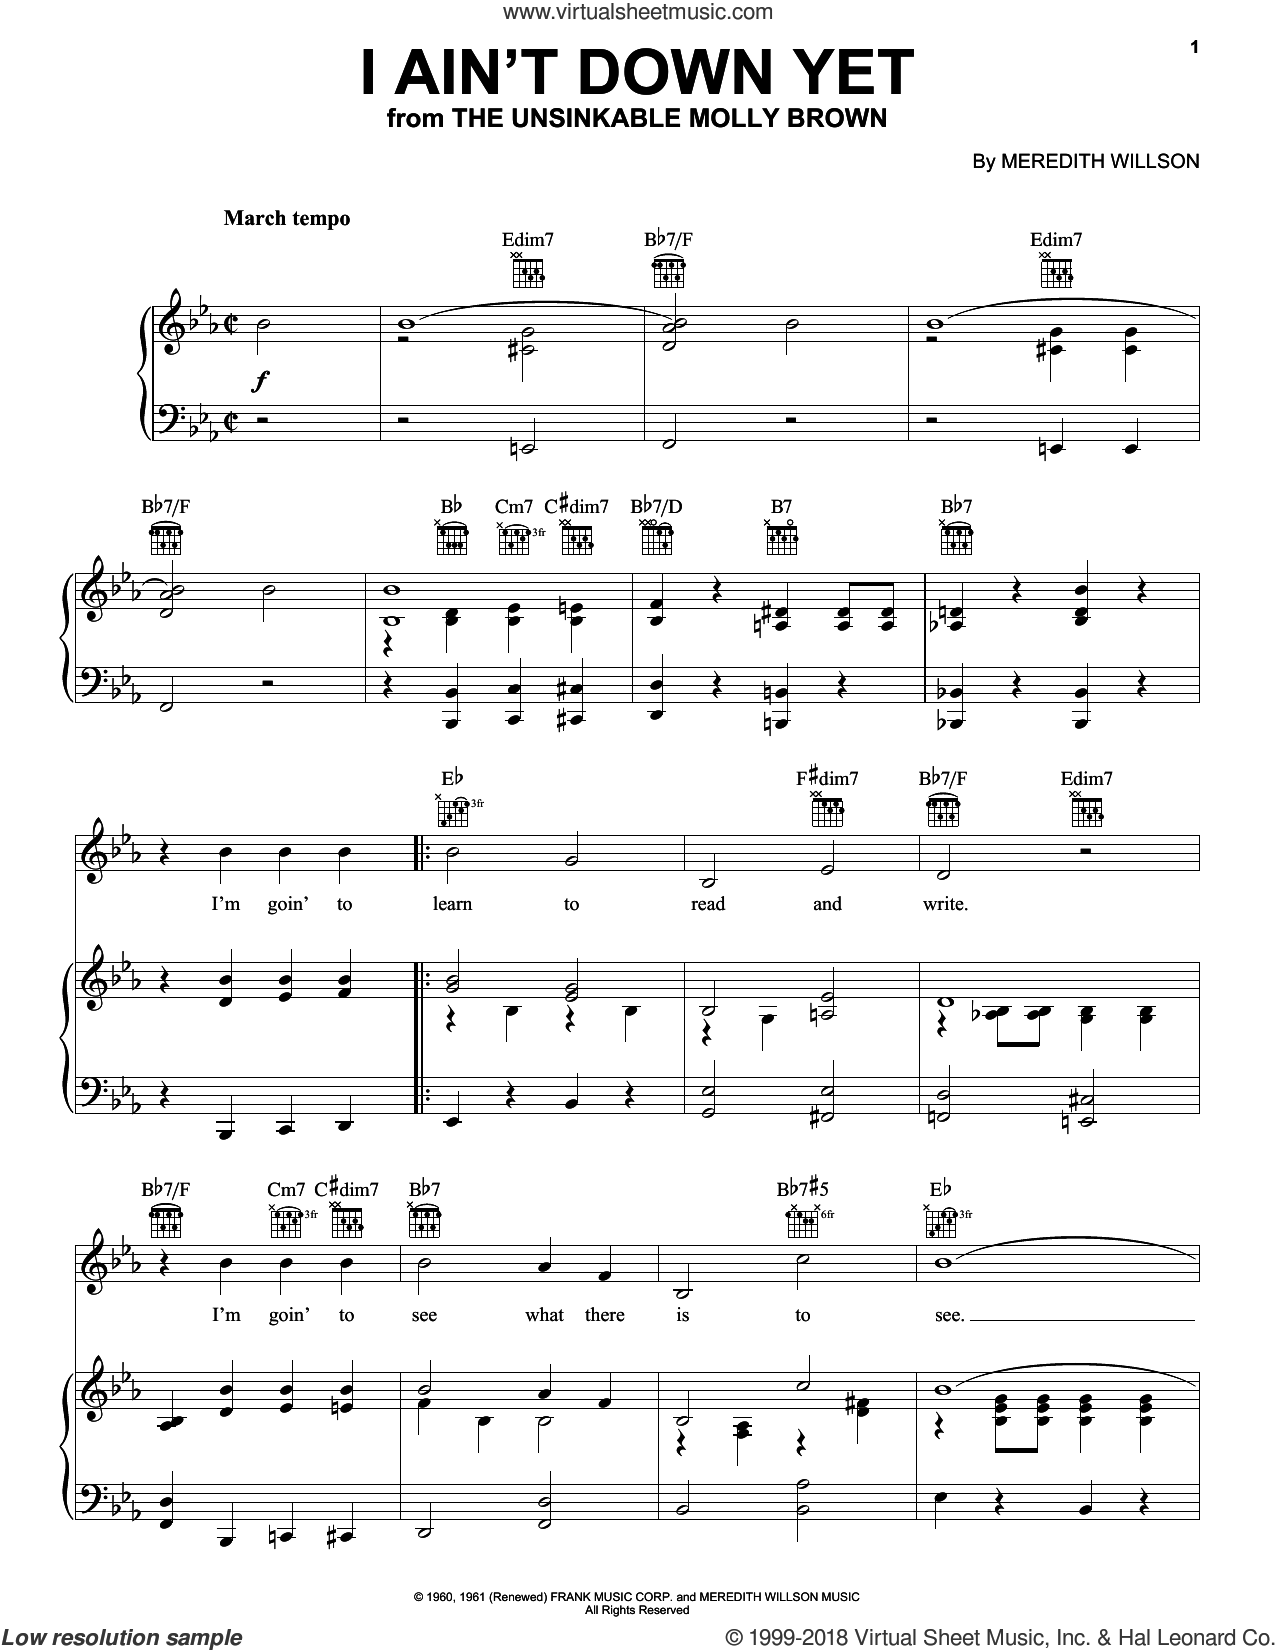 Willson - I Ain't Down Yet sheet music for voice, piano or guitar